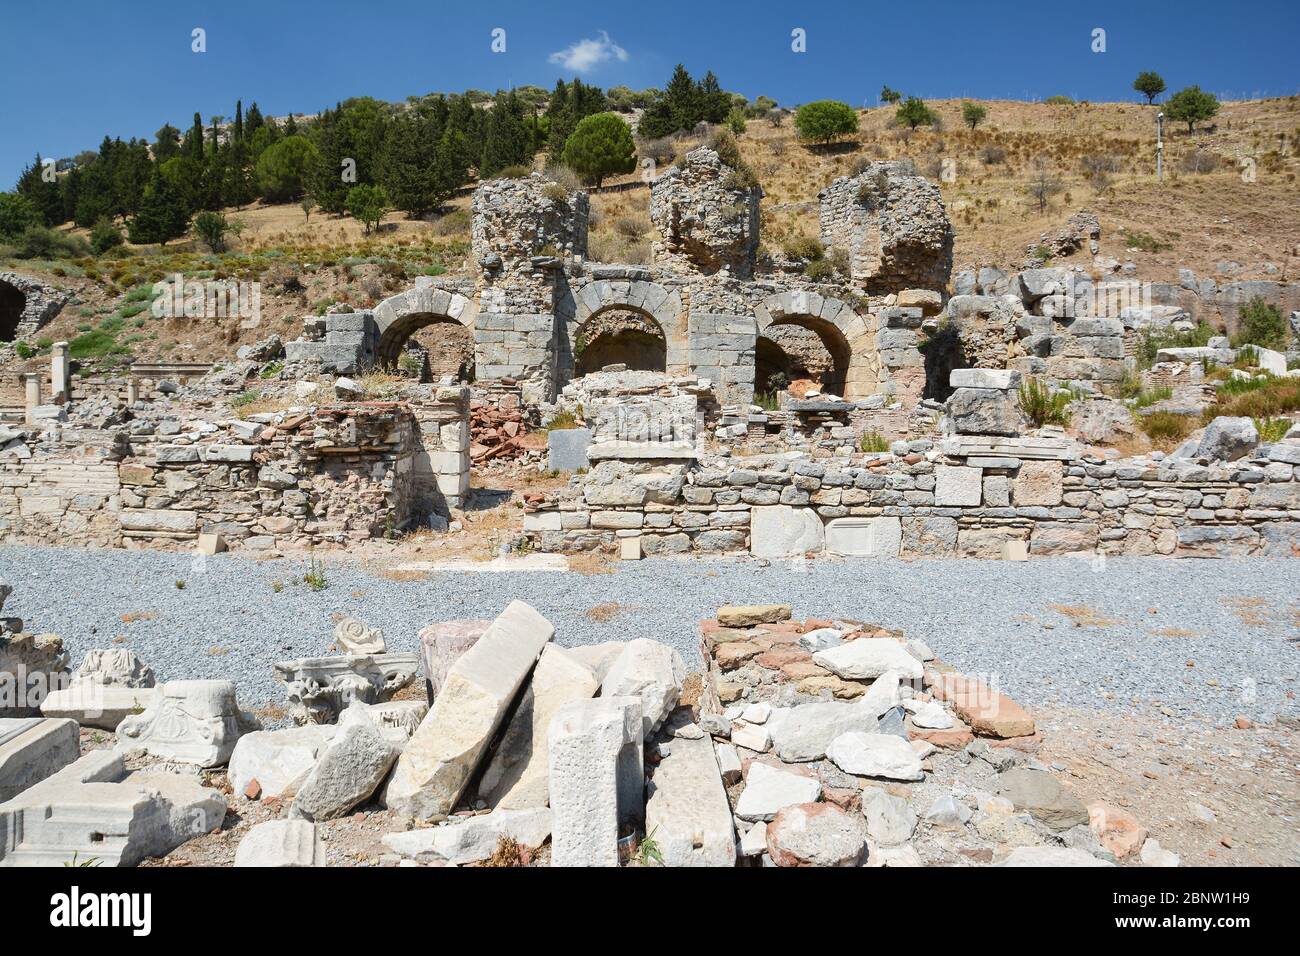 The ruins of the ancient city of Ephesus in Turkey. Stock Photo